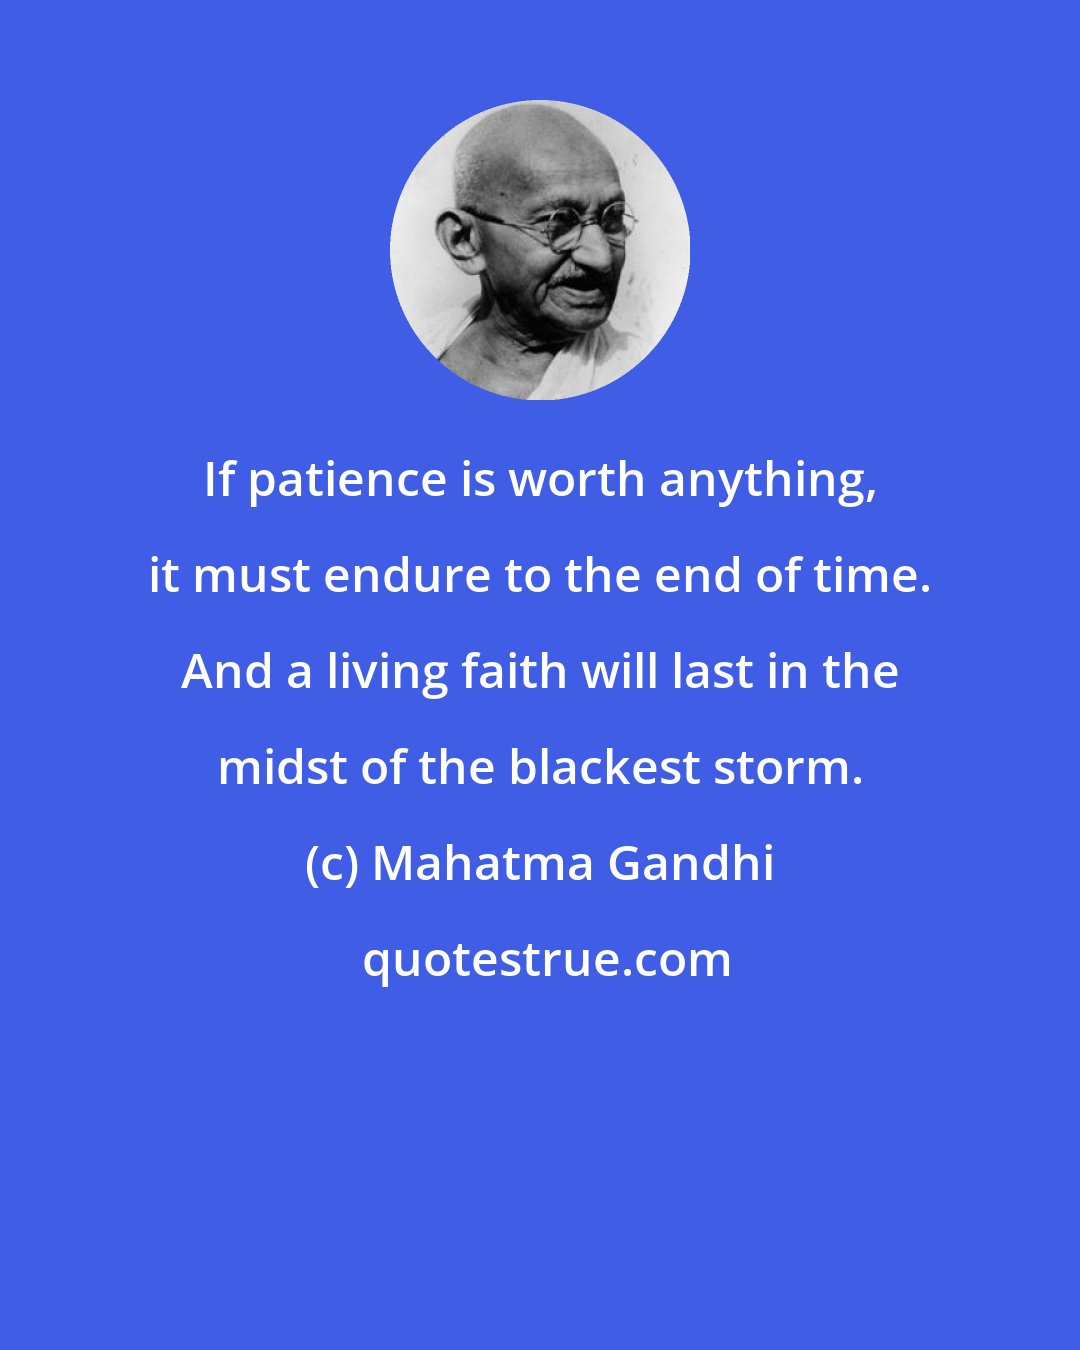 Mahatma Gandhi: If patience is worth anything, it must endure to the end of time. And a living faith will last in the midst of the blackest storm.